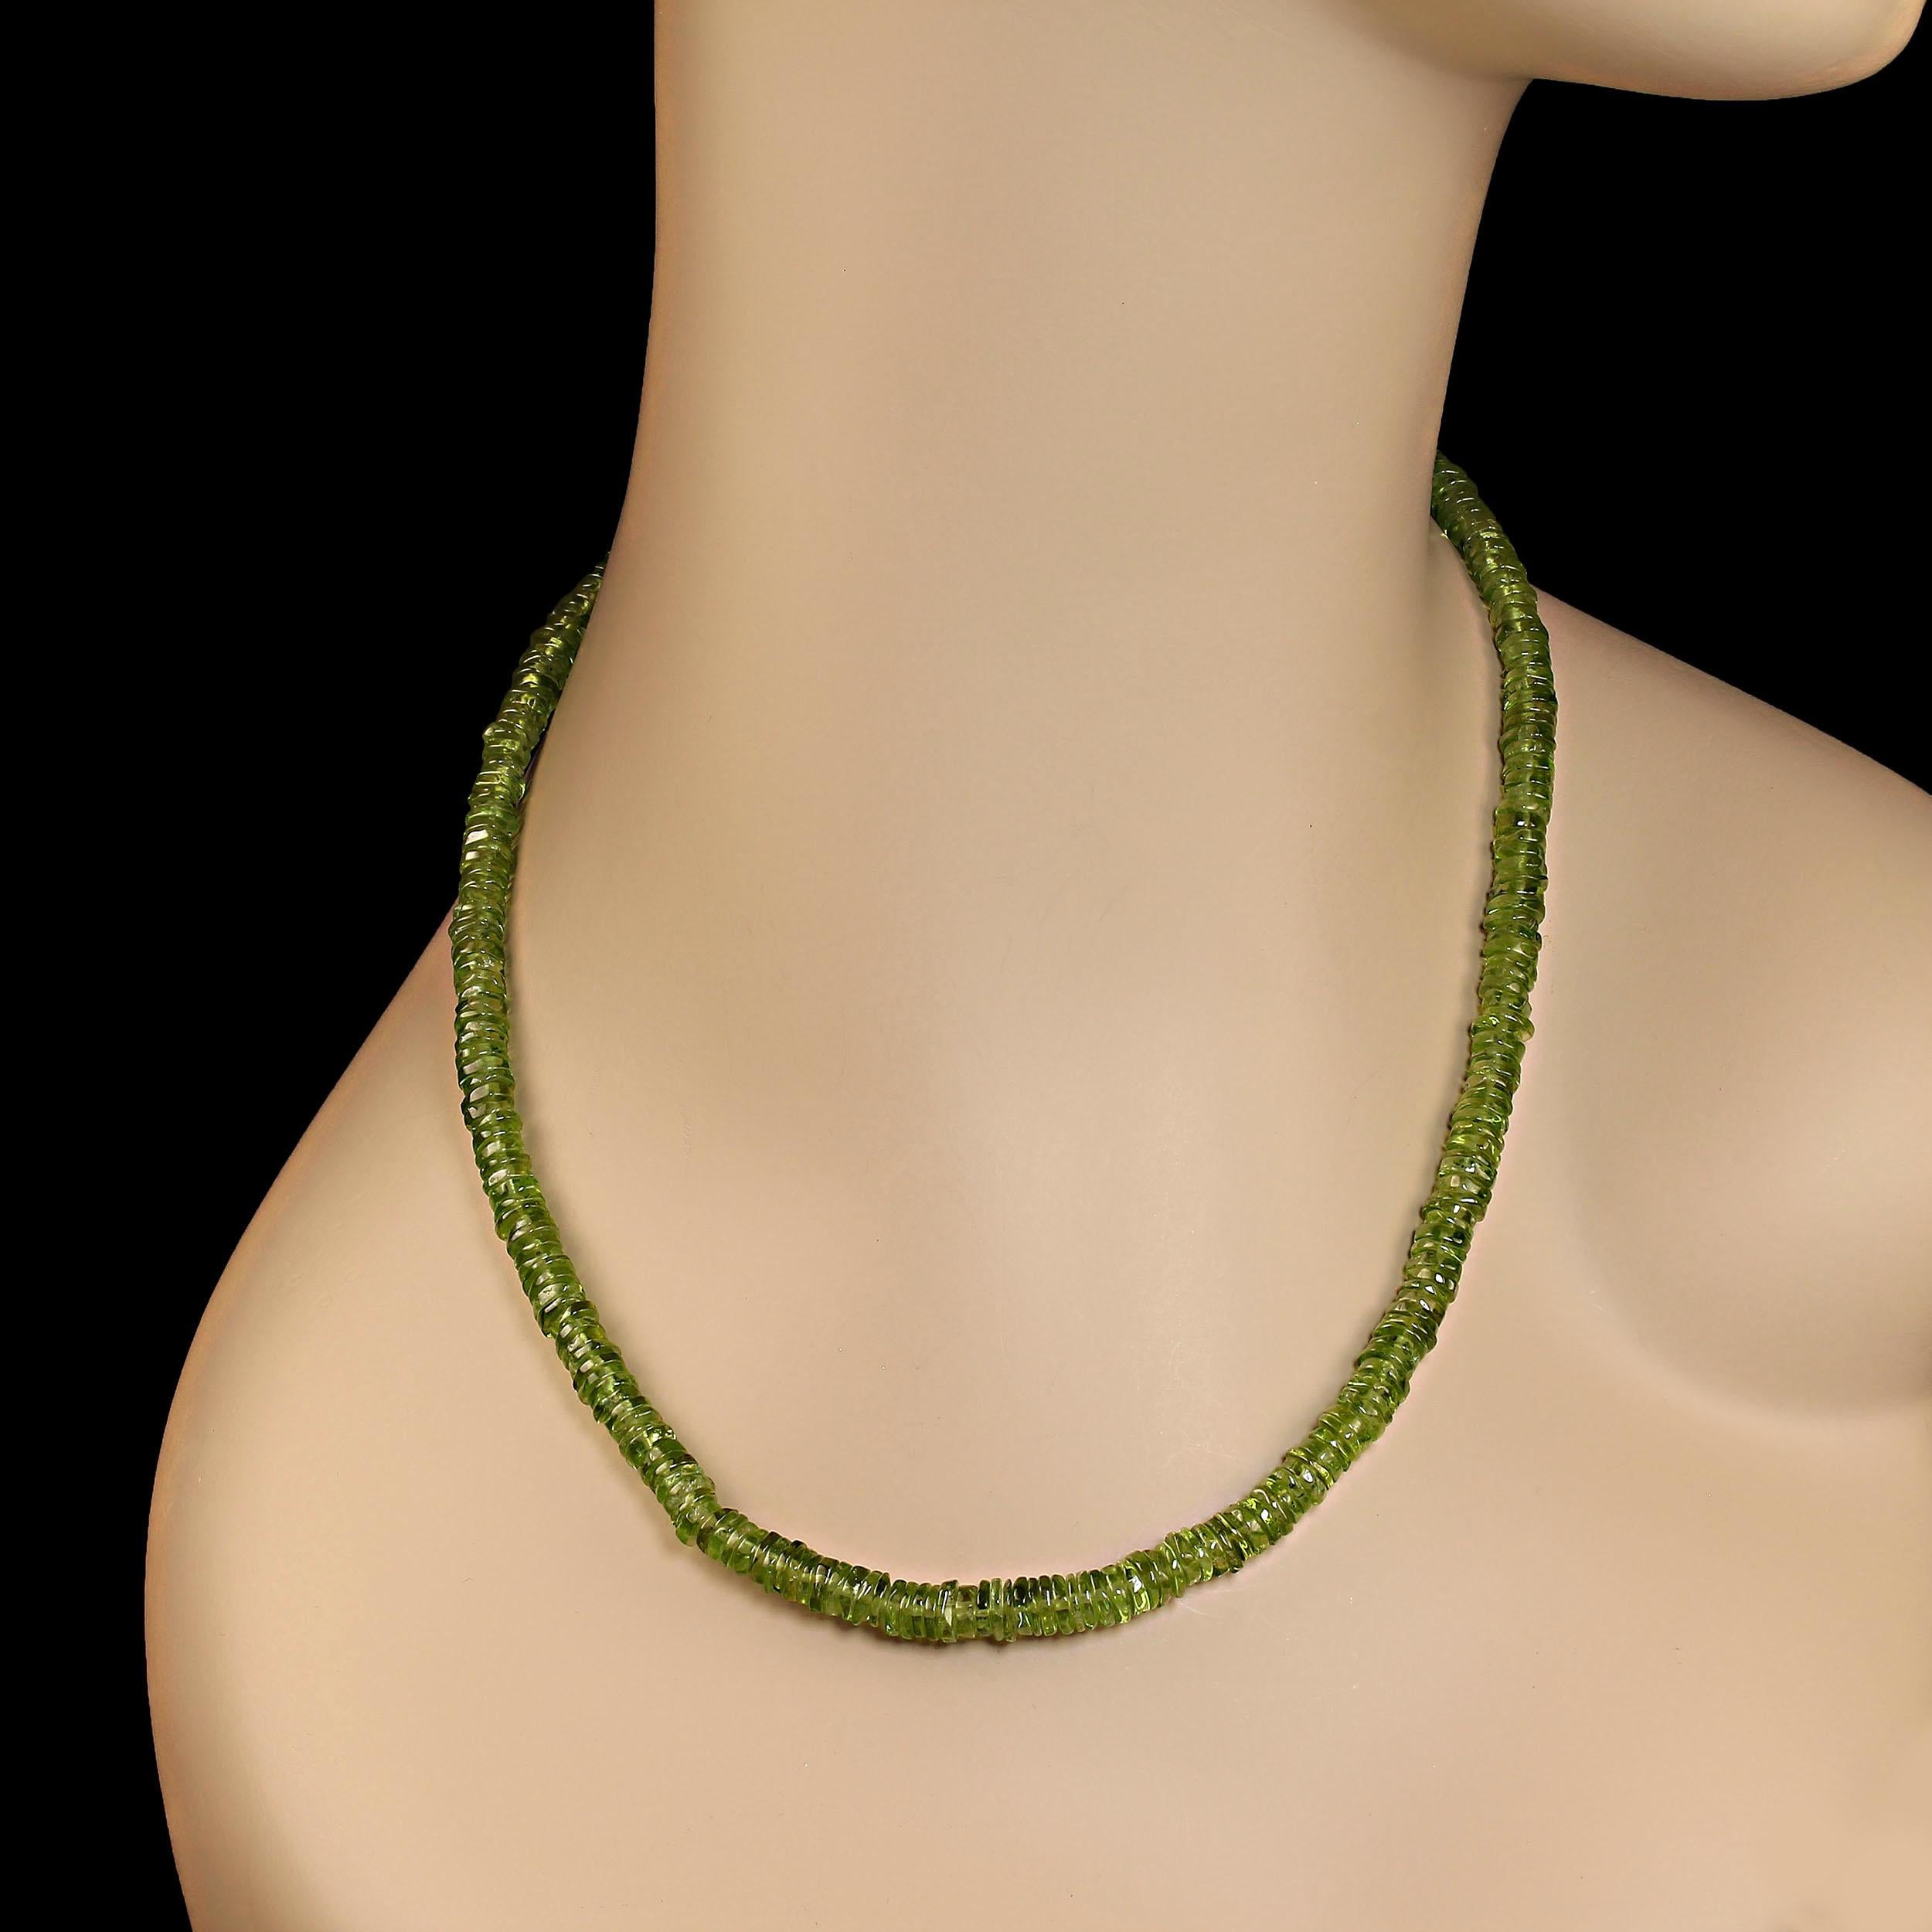 16 Inch choker necklace of glowing green peridot rondelles, 5mm.  These elegant gemstones sit side by side to create a tight, solid look of perfect peridot green.  The necklace is secured with a silver lobster claw clasp with  extra loops for